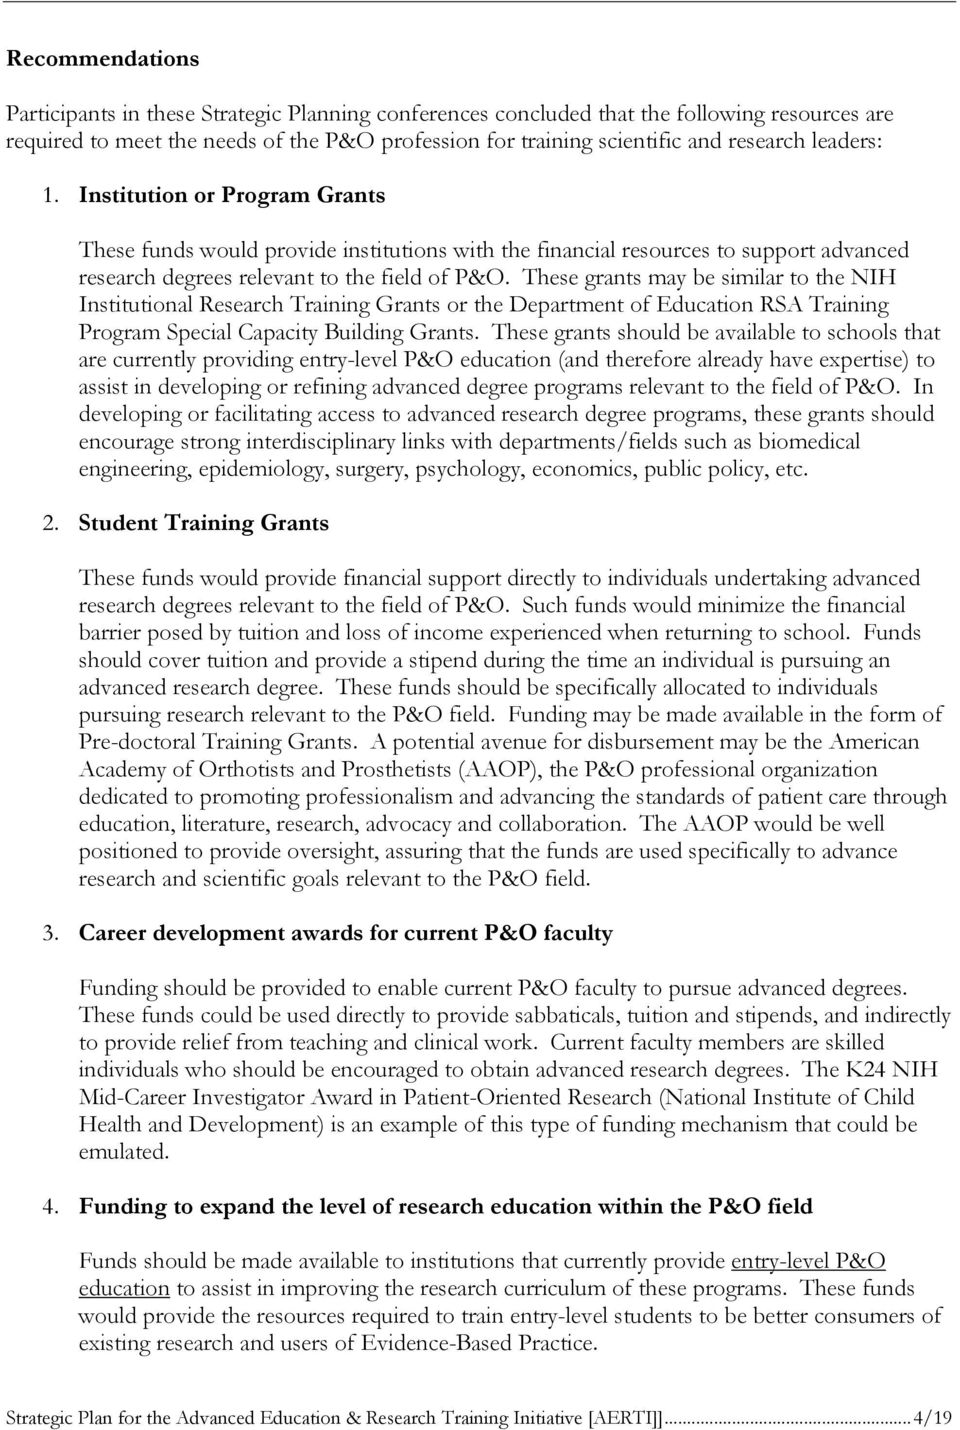 These grants may be similar to the NIH Institutional Research Training Grants or the Department of Education RSA Training Program Special Capacity Building Grants.